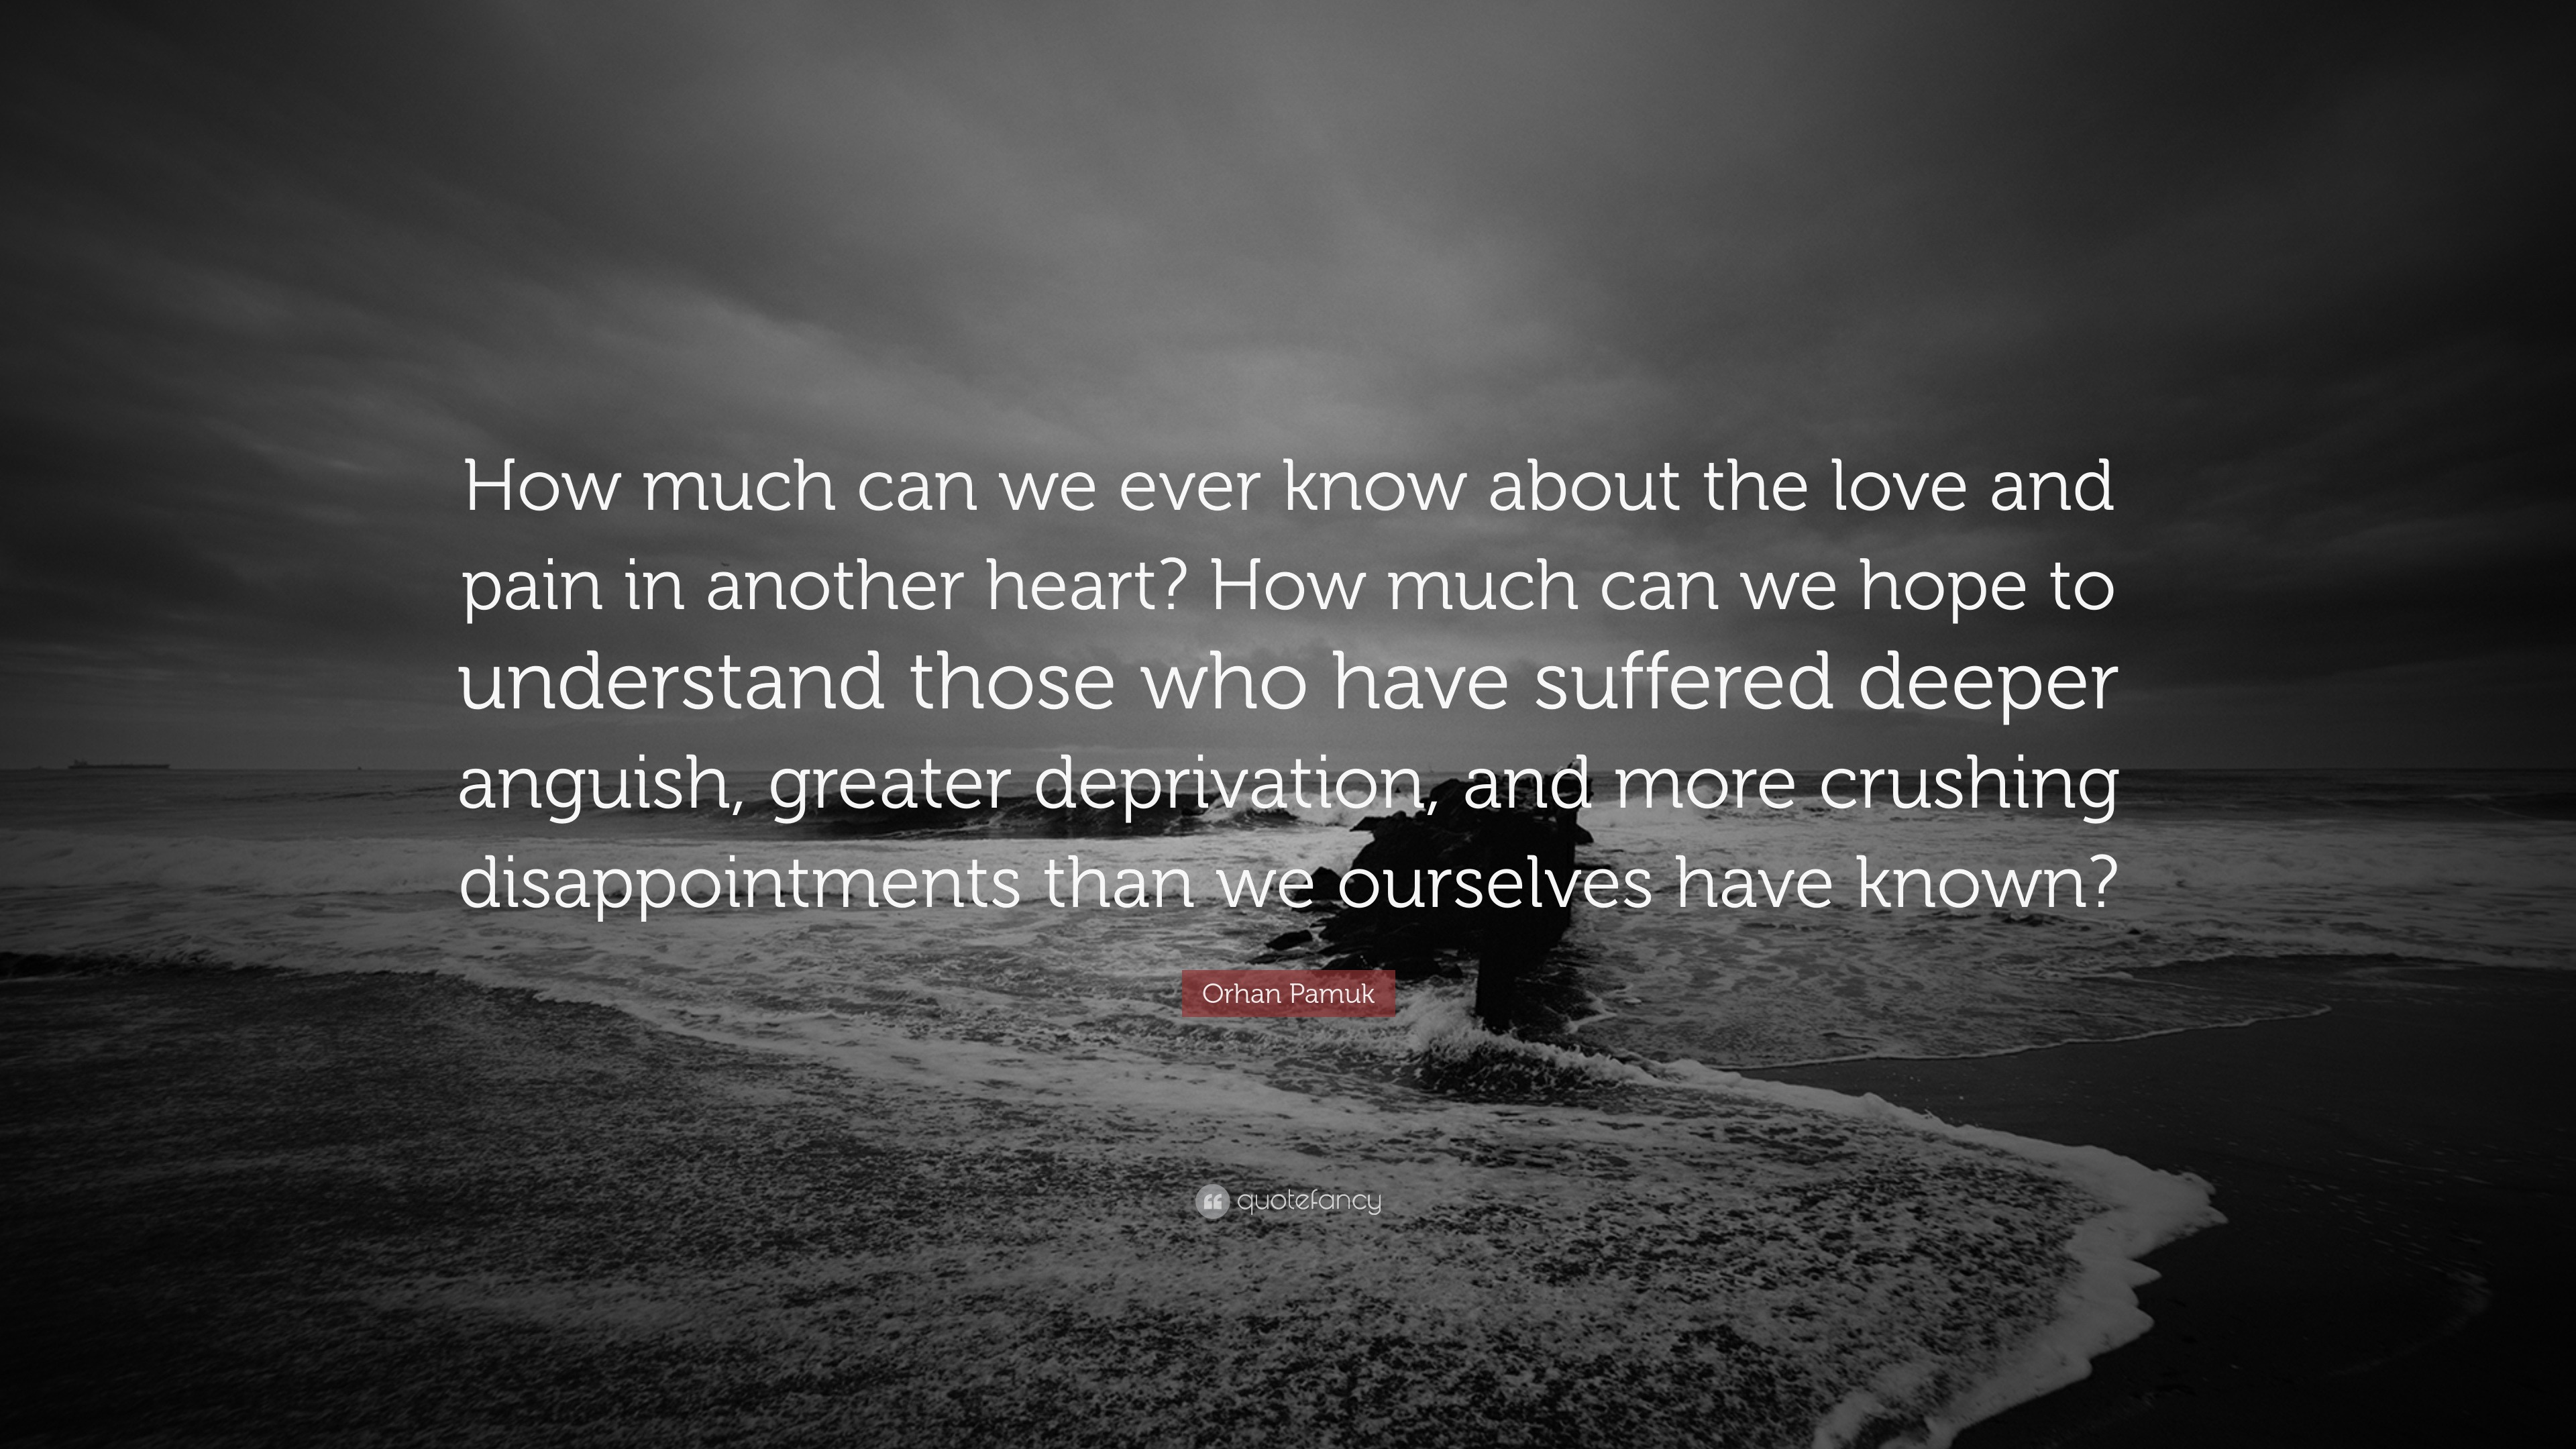 Orhan Pamuk Quote: “How much can we ever know about the love and pain ...